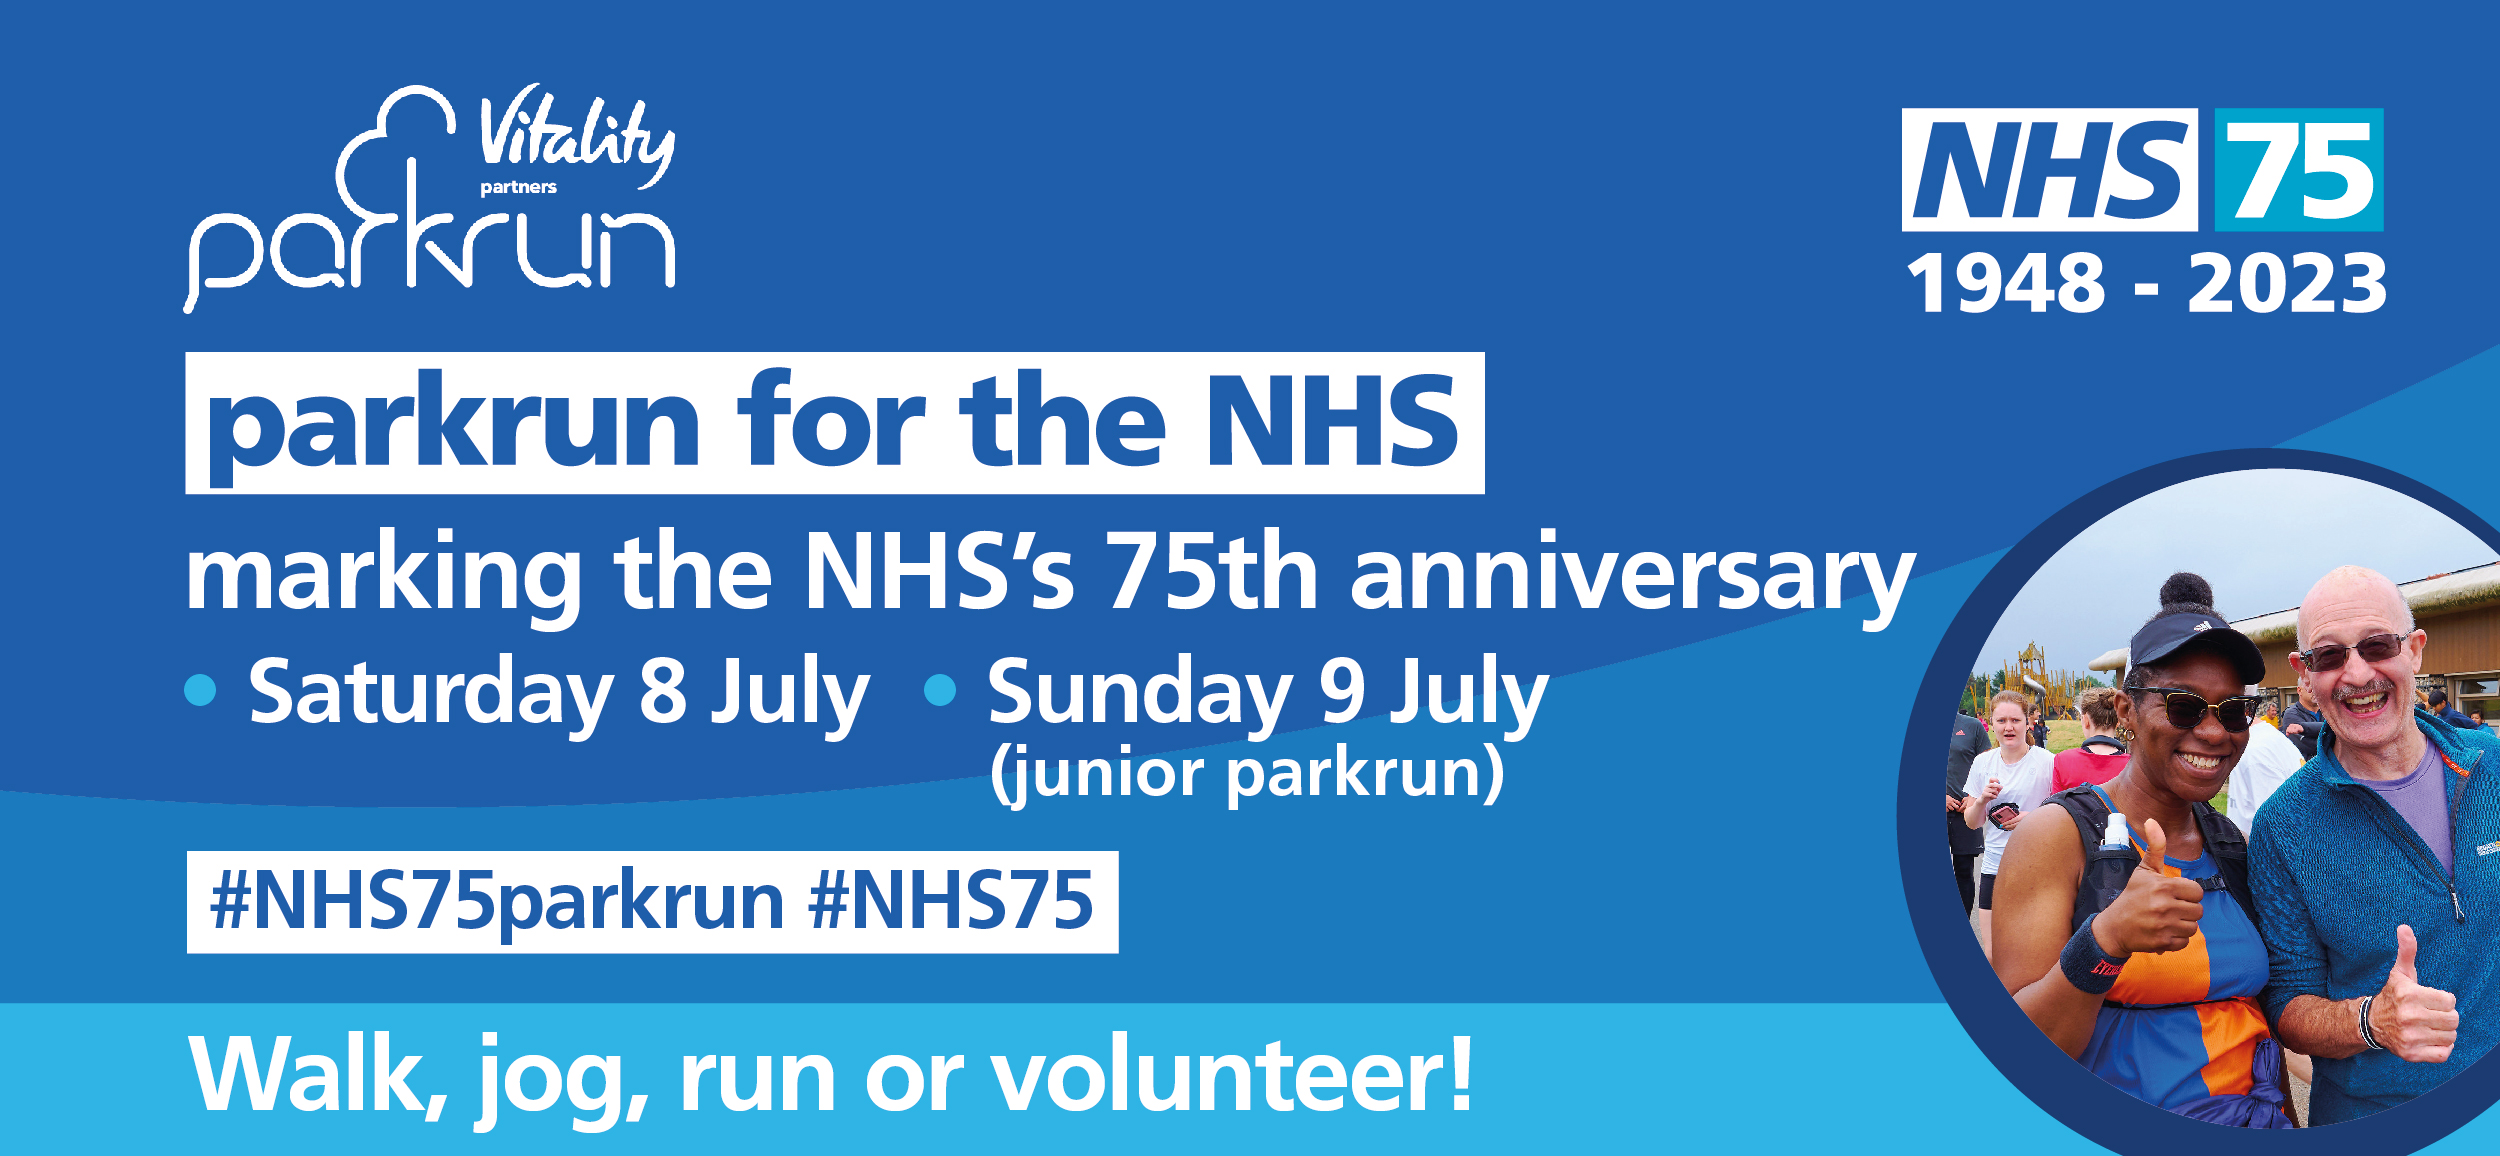 Infographic - parkrun for the NHS